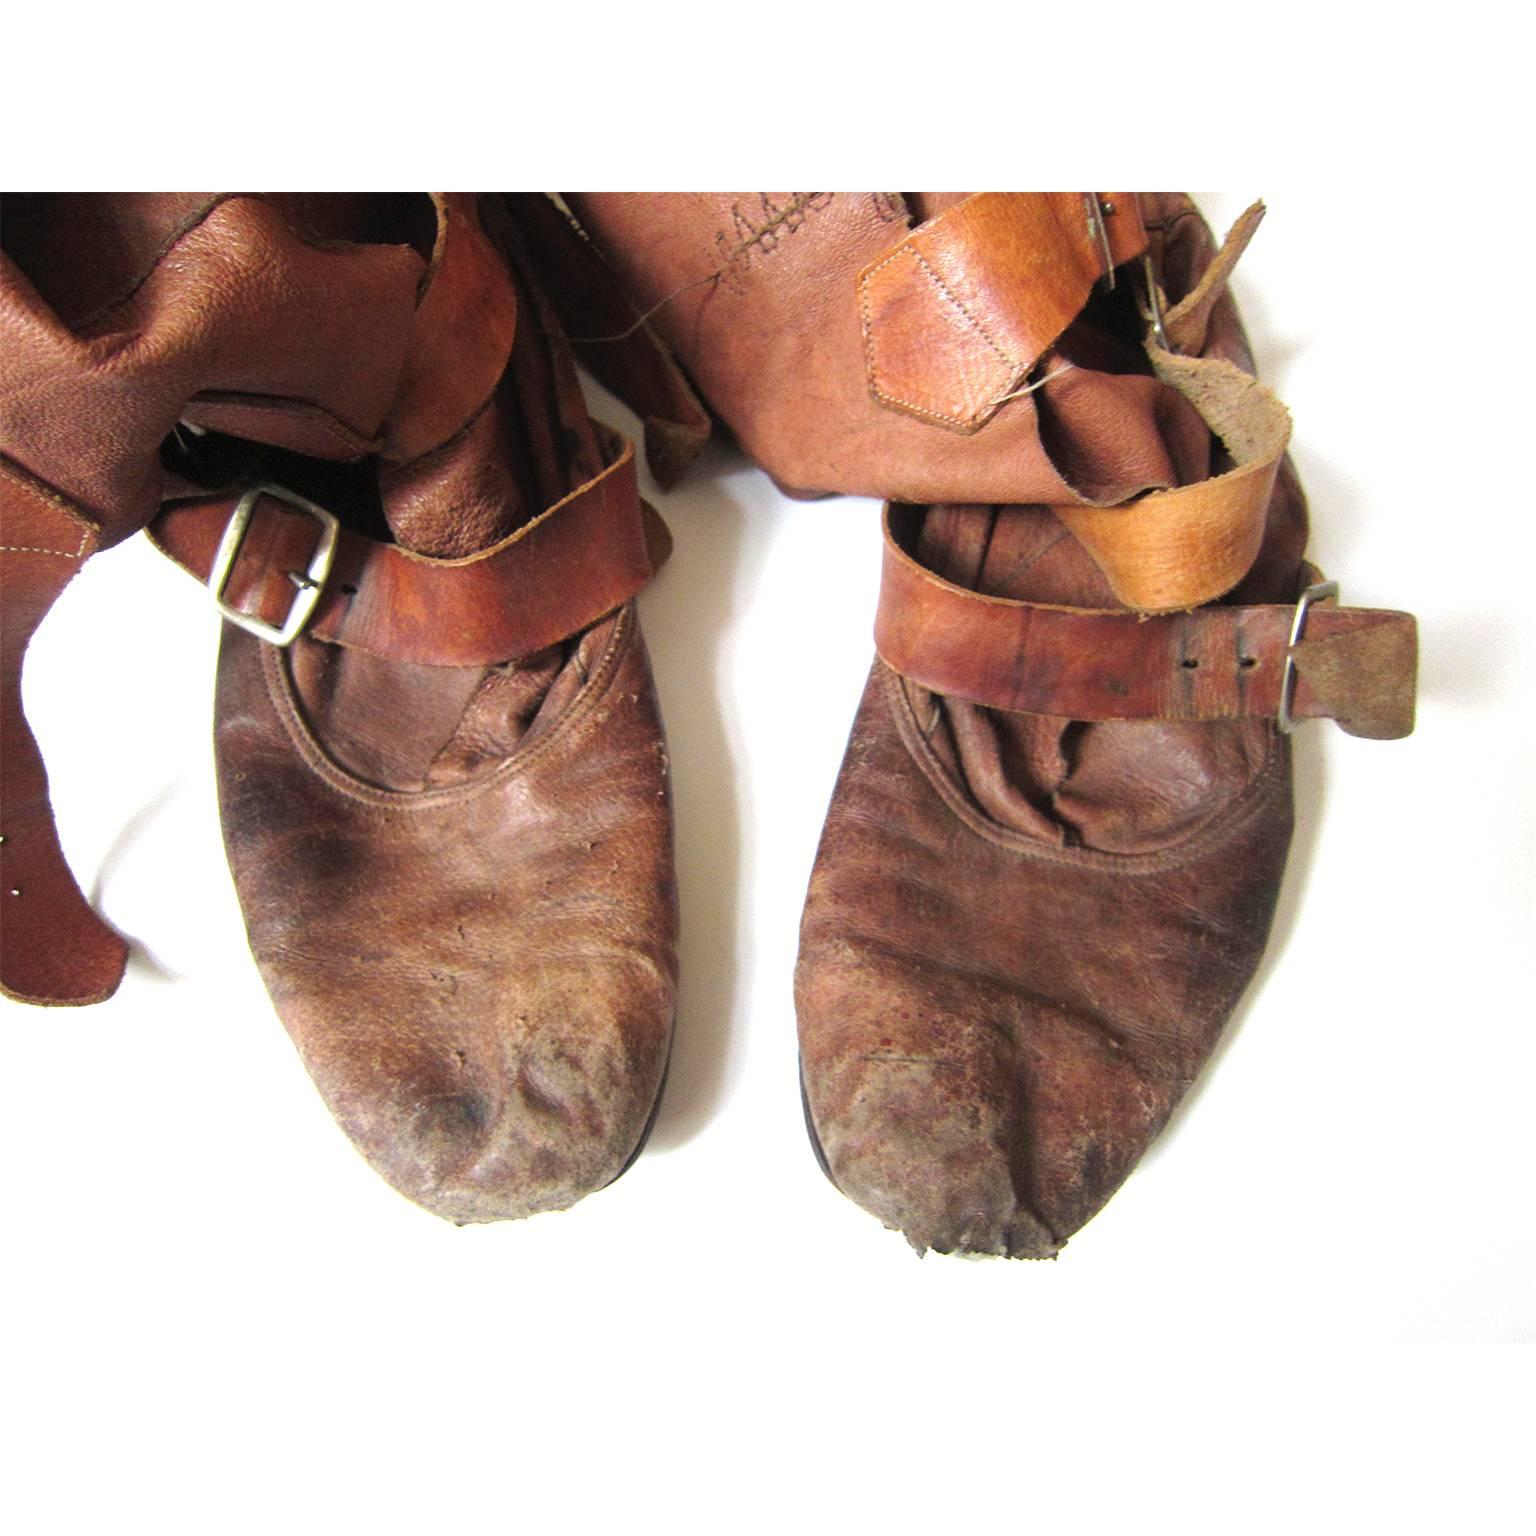 Worlds End Strap Boots Vivienne Westwood / Malcolm Mclaren 1982-1983 In Good Condition For Sale In Berlin, DE